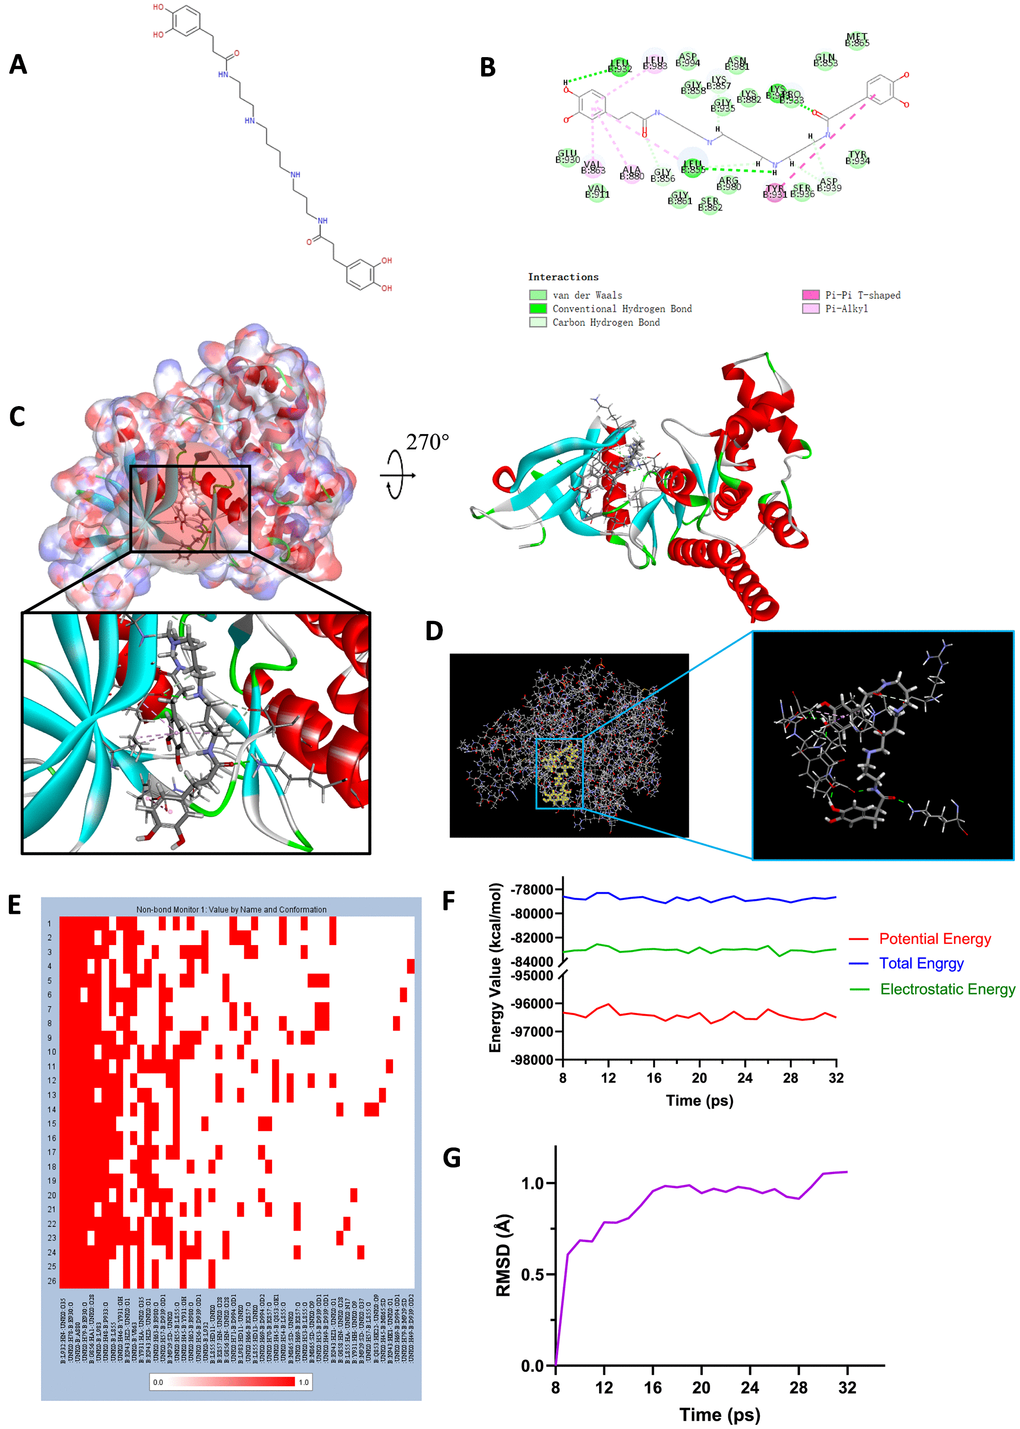 (A) Chemical structure of novel compound ZINC000013513540 selected from virtual screening. (B) Schematic drawing of inter-molecular interaction of the computed binding modes of ZINC000013513540 with JAK2. (C) Visualization of interactions between ligands and JAK2 (ZINC000013513540-JAK2 complex). The surface of binding area as well as active binding sphere were added. Blue represented positive charge, red represented negative charge and active binding sphere was shown as red region. Inhibitor was shown in sticks, together with the structures around ligand-receptor junction were shown in thinner sticks. (D) Mutual interactions between ZINC000013513540 and JAK2 under non-solvent environment after molecular dynamics simulation. Ligand was displayed in sticks and structures around ligand-receptor junction were displayed in thinner sticks. (E) Hydrogen bond heatmap in the progression of molecular dynamics. (F) Different kinds of energy values of ZINC00001351354-JAK2 complex. (G) Average backbone RMSD of ZINC000013513540-JAK2 complex. RMSD, root-mean-squared-deviation.